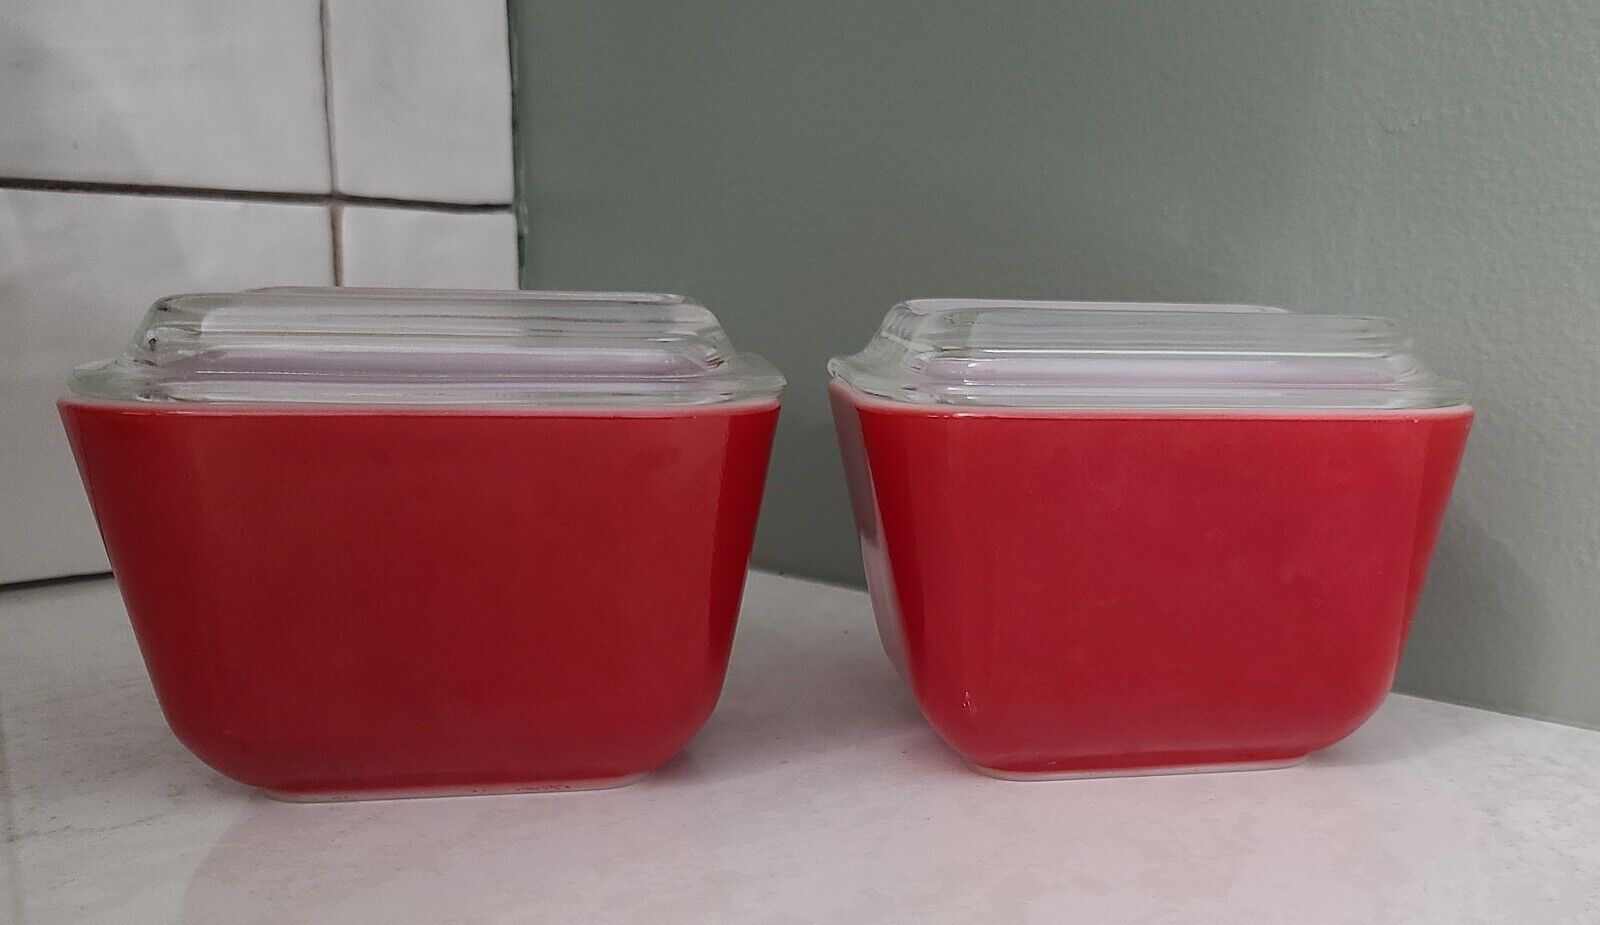 Set of Vintage Red Pyrex Refrigerator Dishes (2) with Lids 1.5 Cup Capacity